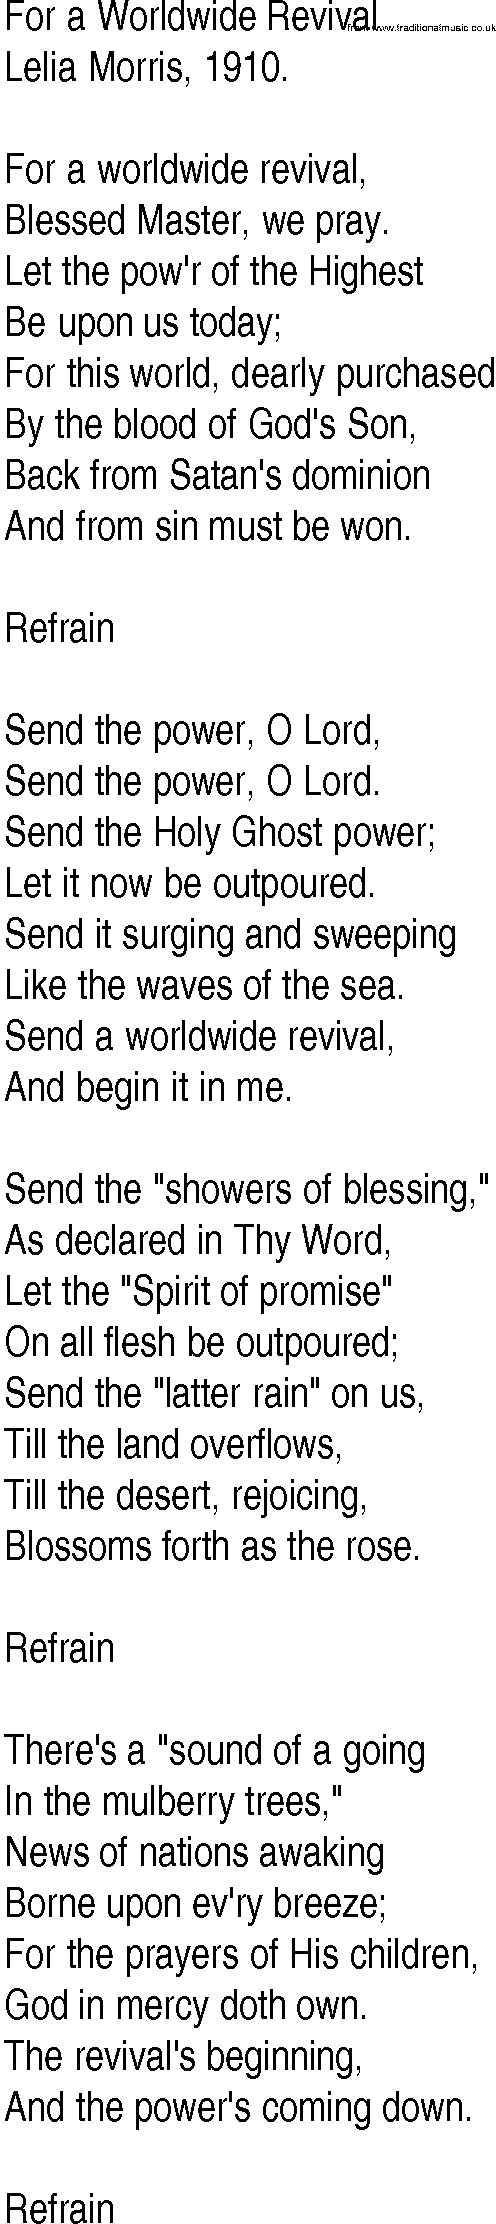 Hymn and Gospel Song: For a Worldwide Revival by Lelia Morris lyrics